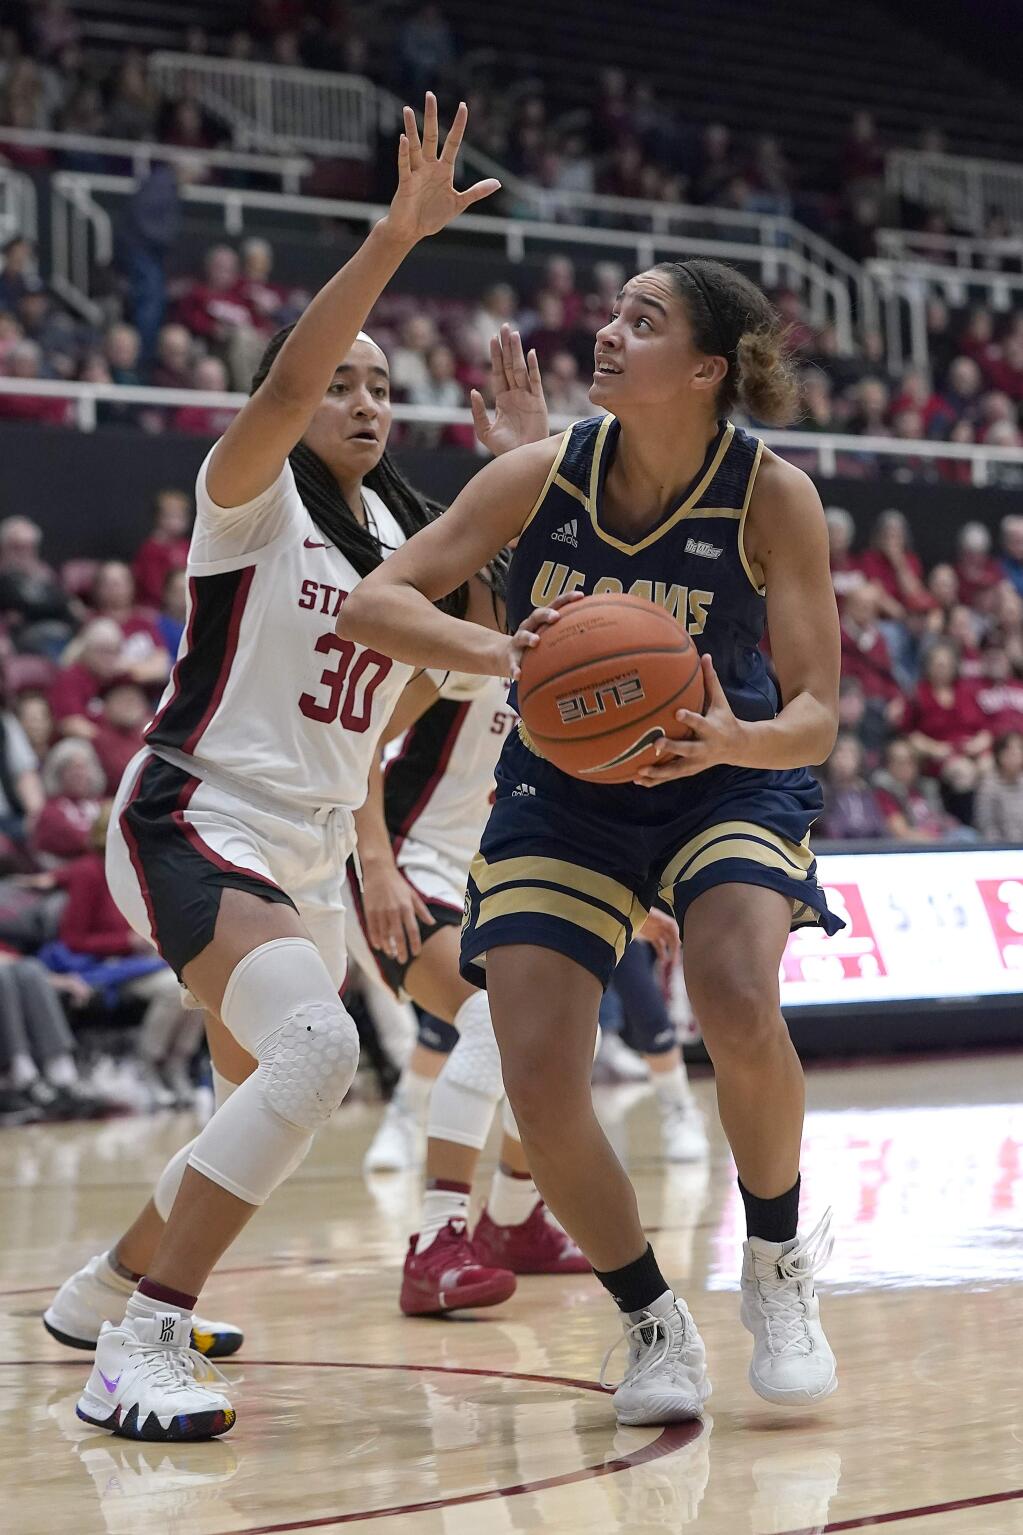 UC Davis forward Cierra Hall, right, looks to shoot against Stanford guard Haley Jones (30) during the second half, aturday, Dec. 28, 2019, in Stanford. (AP Photo/Tony Avelar)